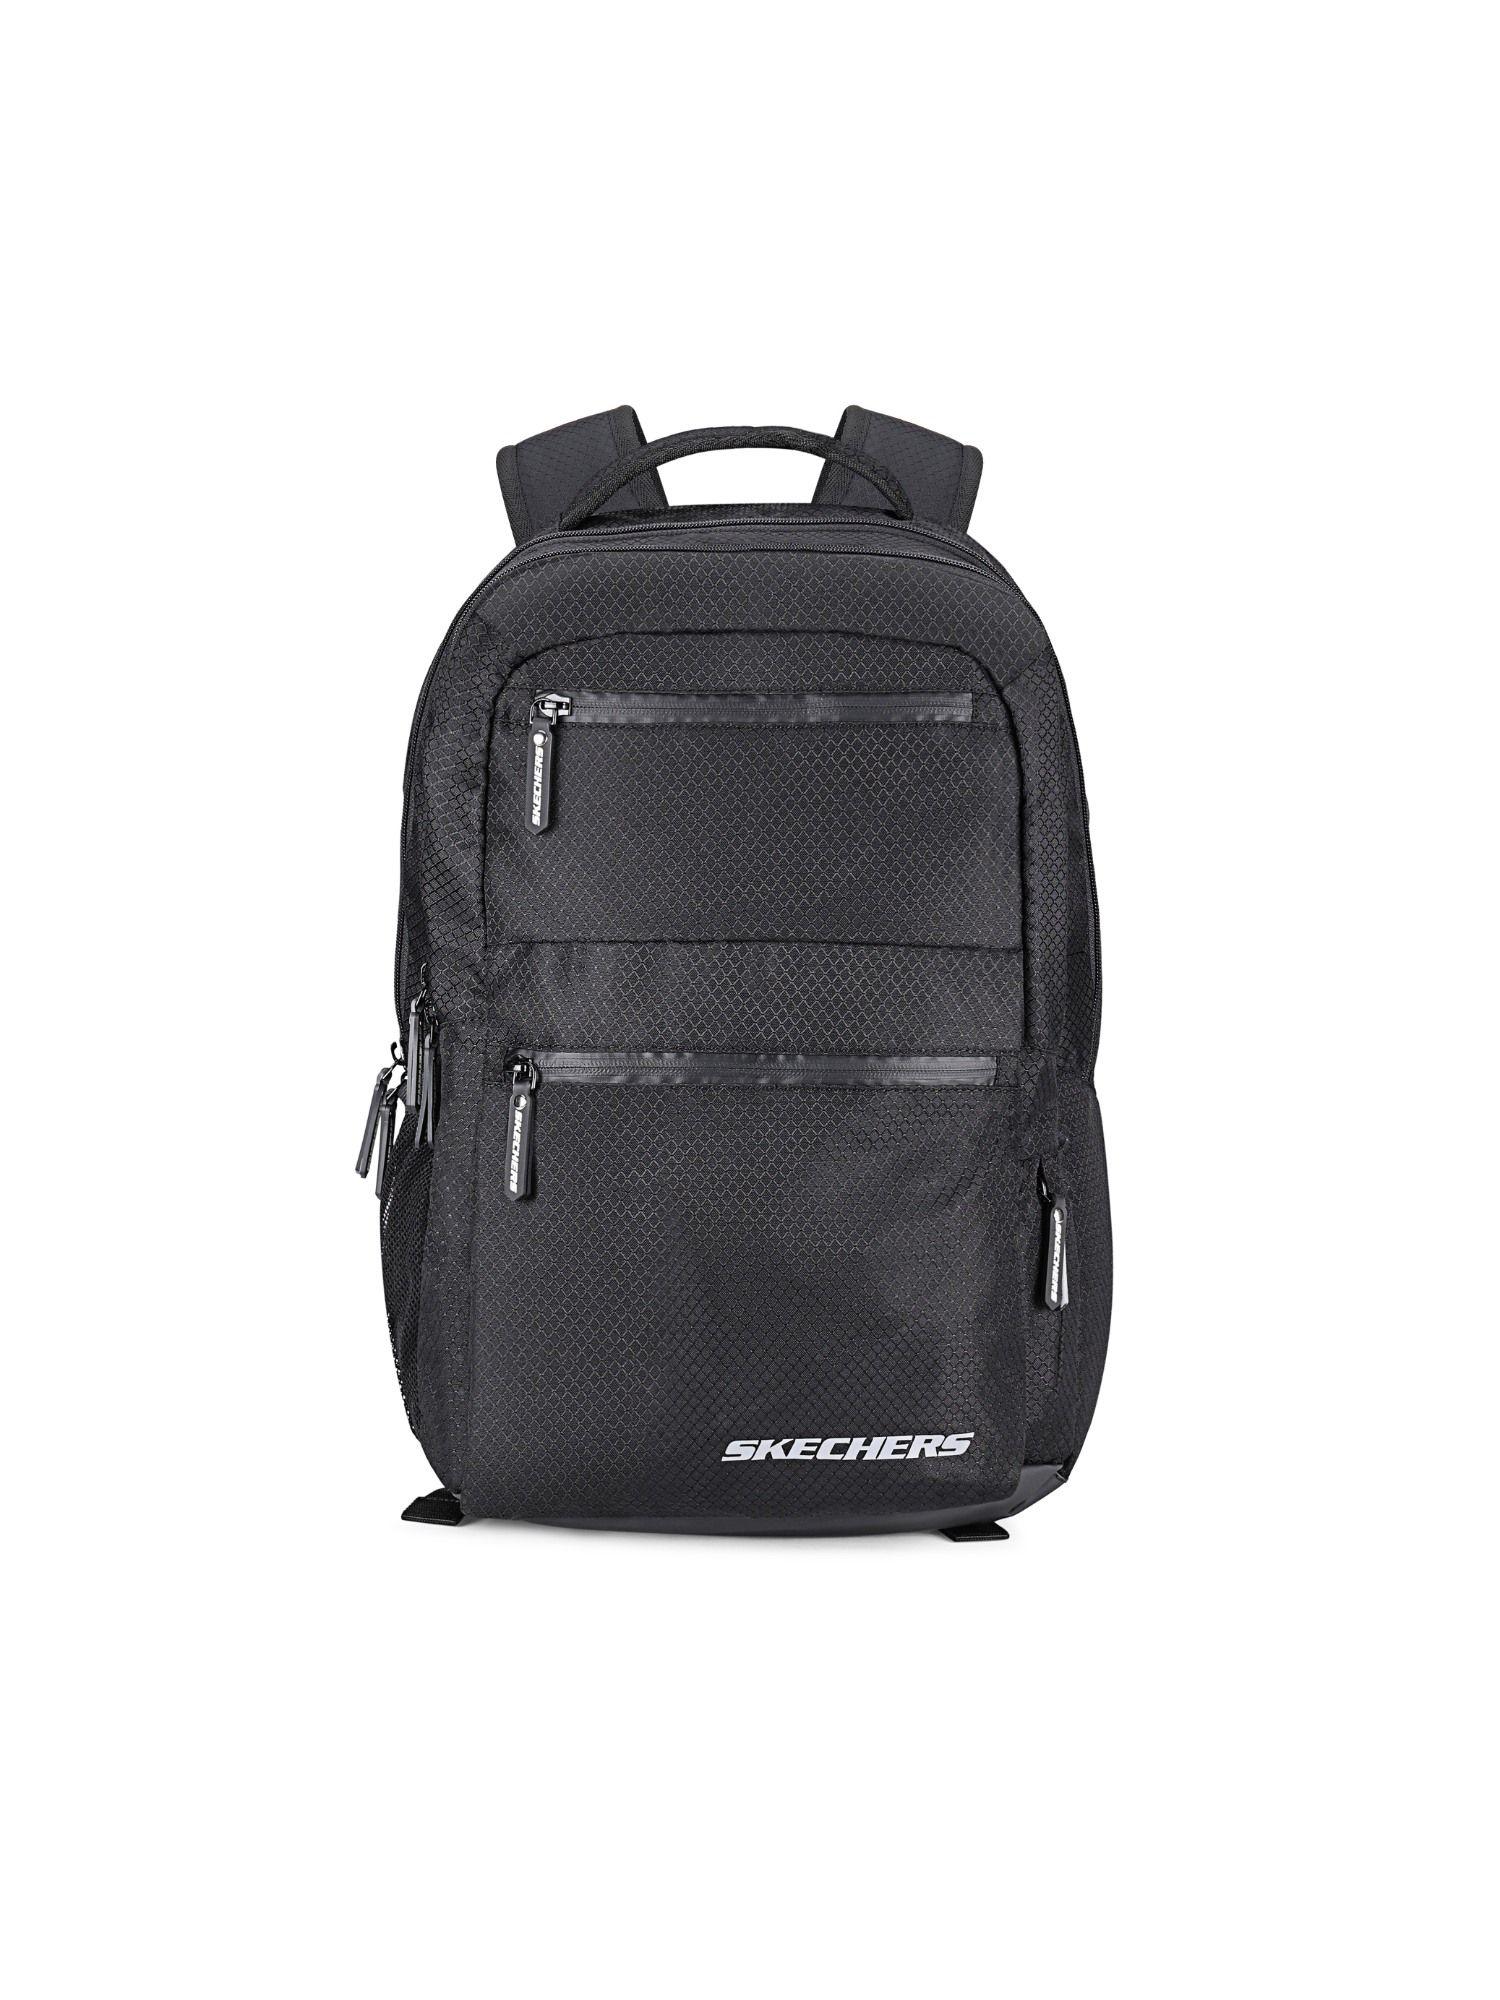 Unisex Backpack with Three Compartment - Grey